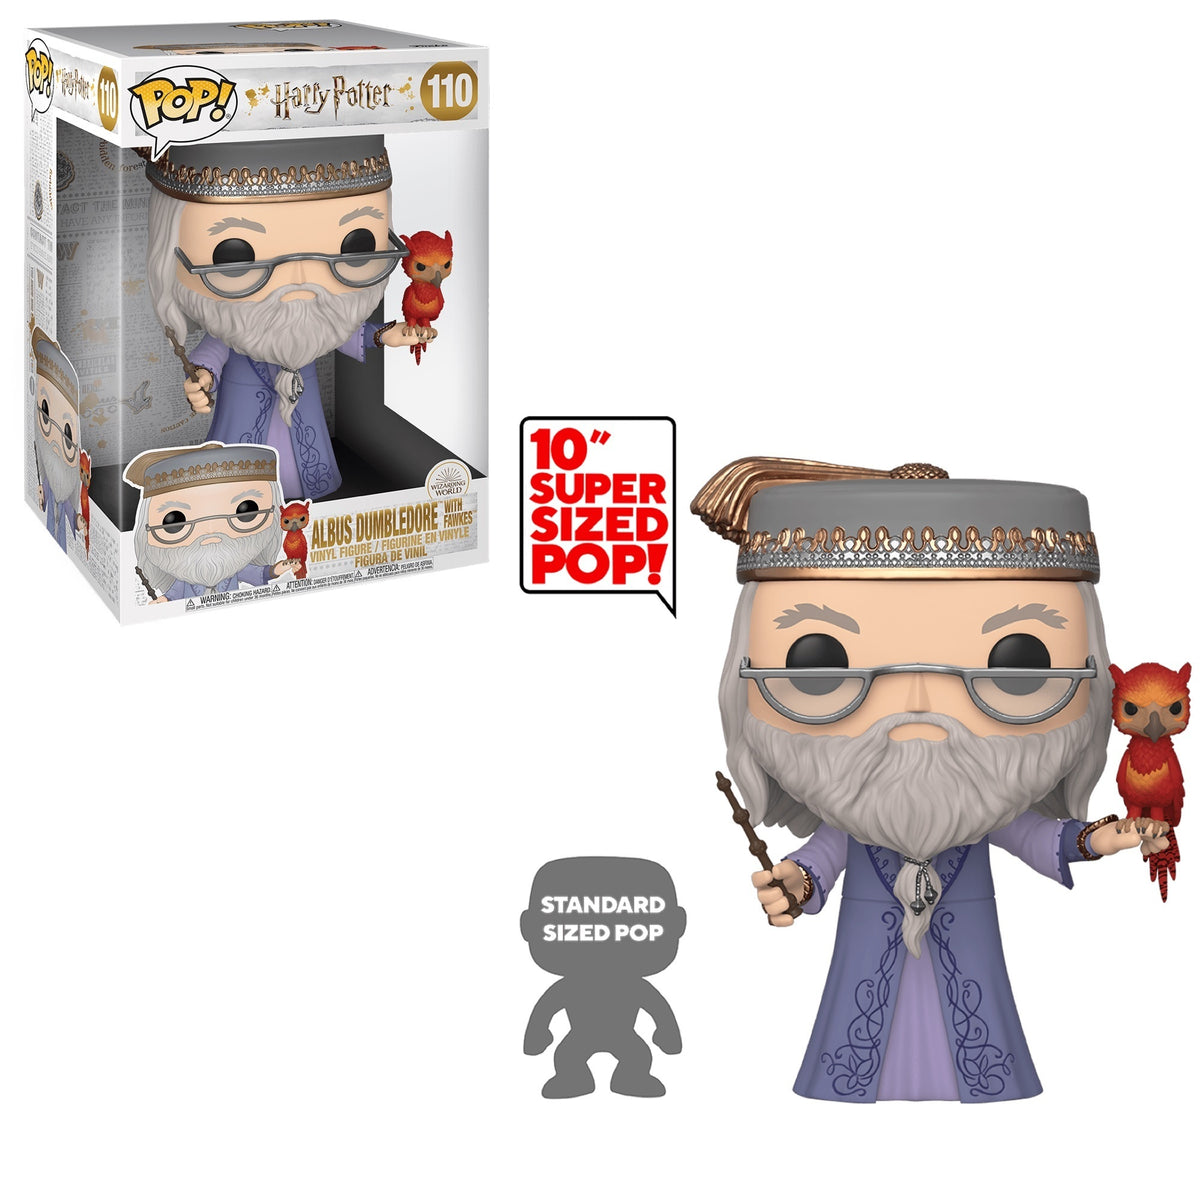 48038 FUNKO POP! Harry Potter - 10 Dumbledore with Fawkes - AliExpress